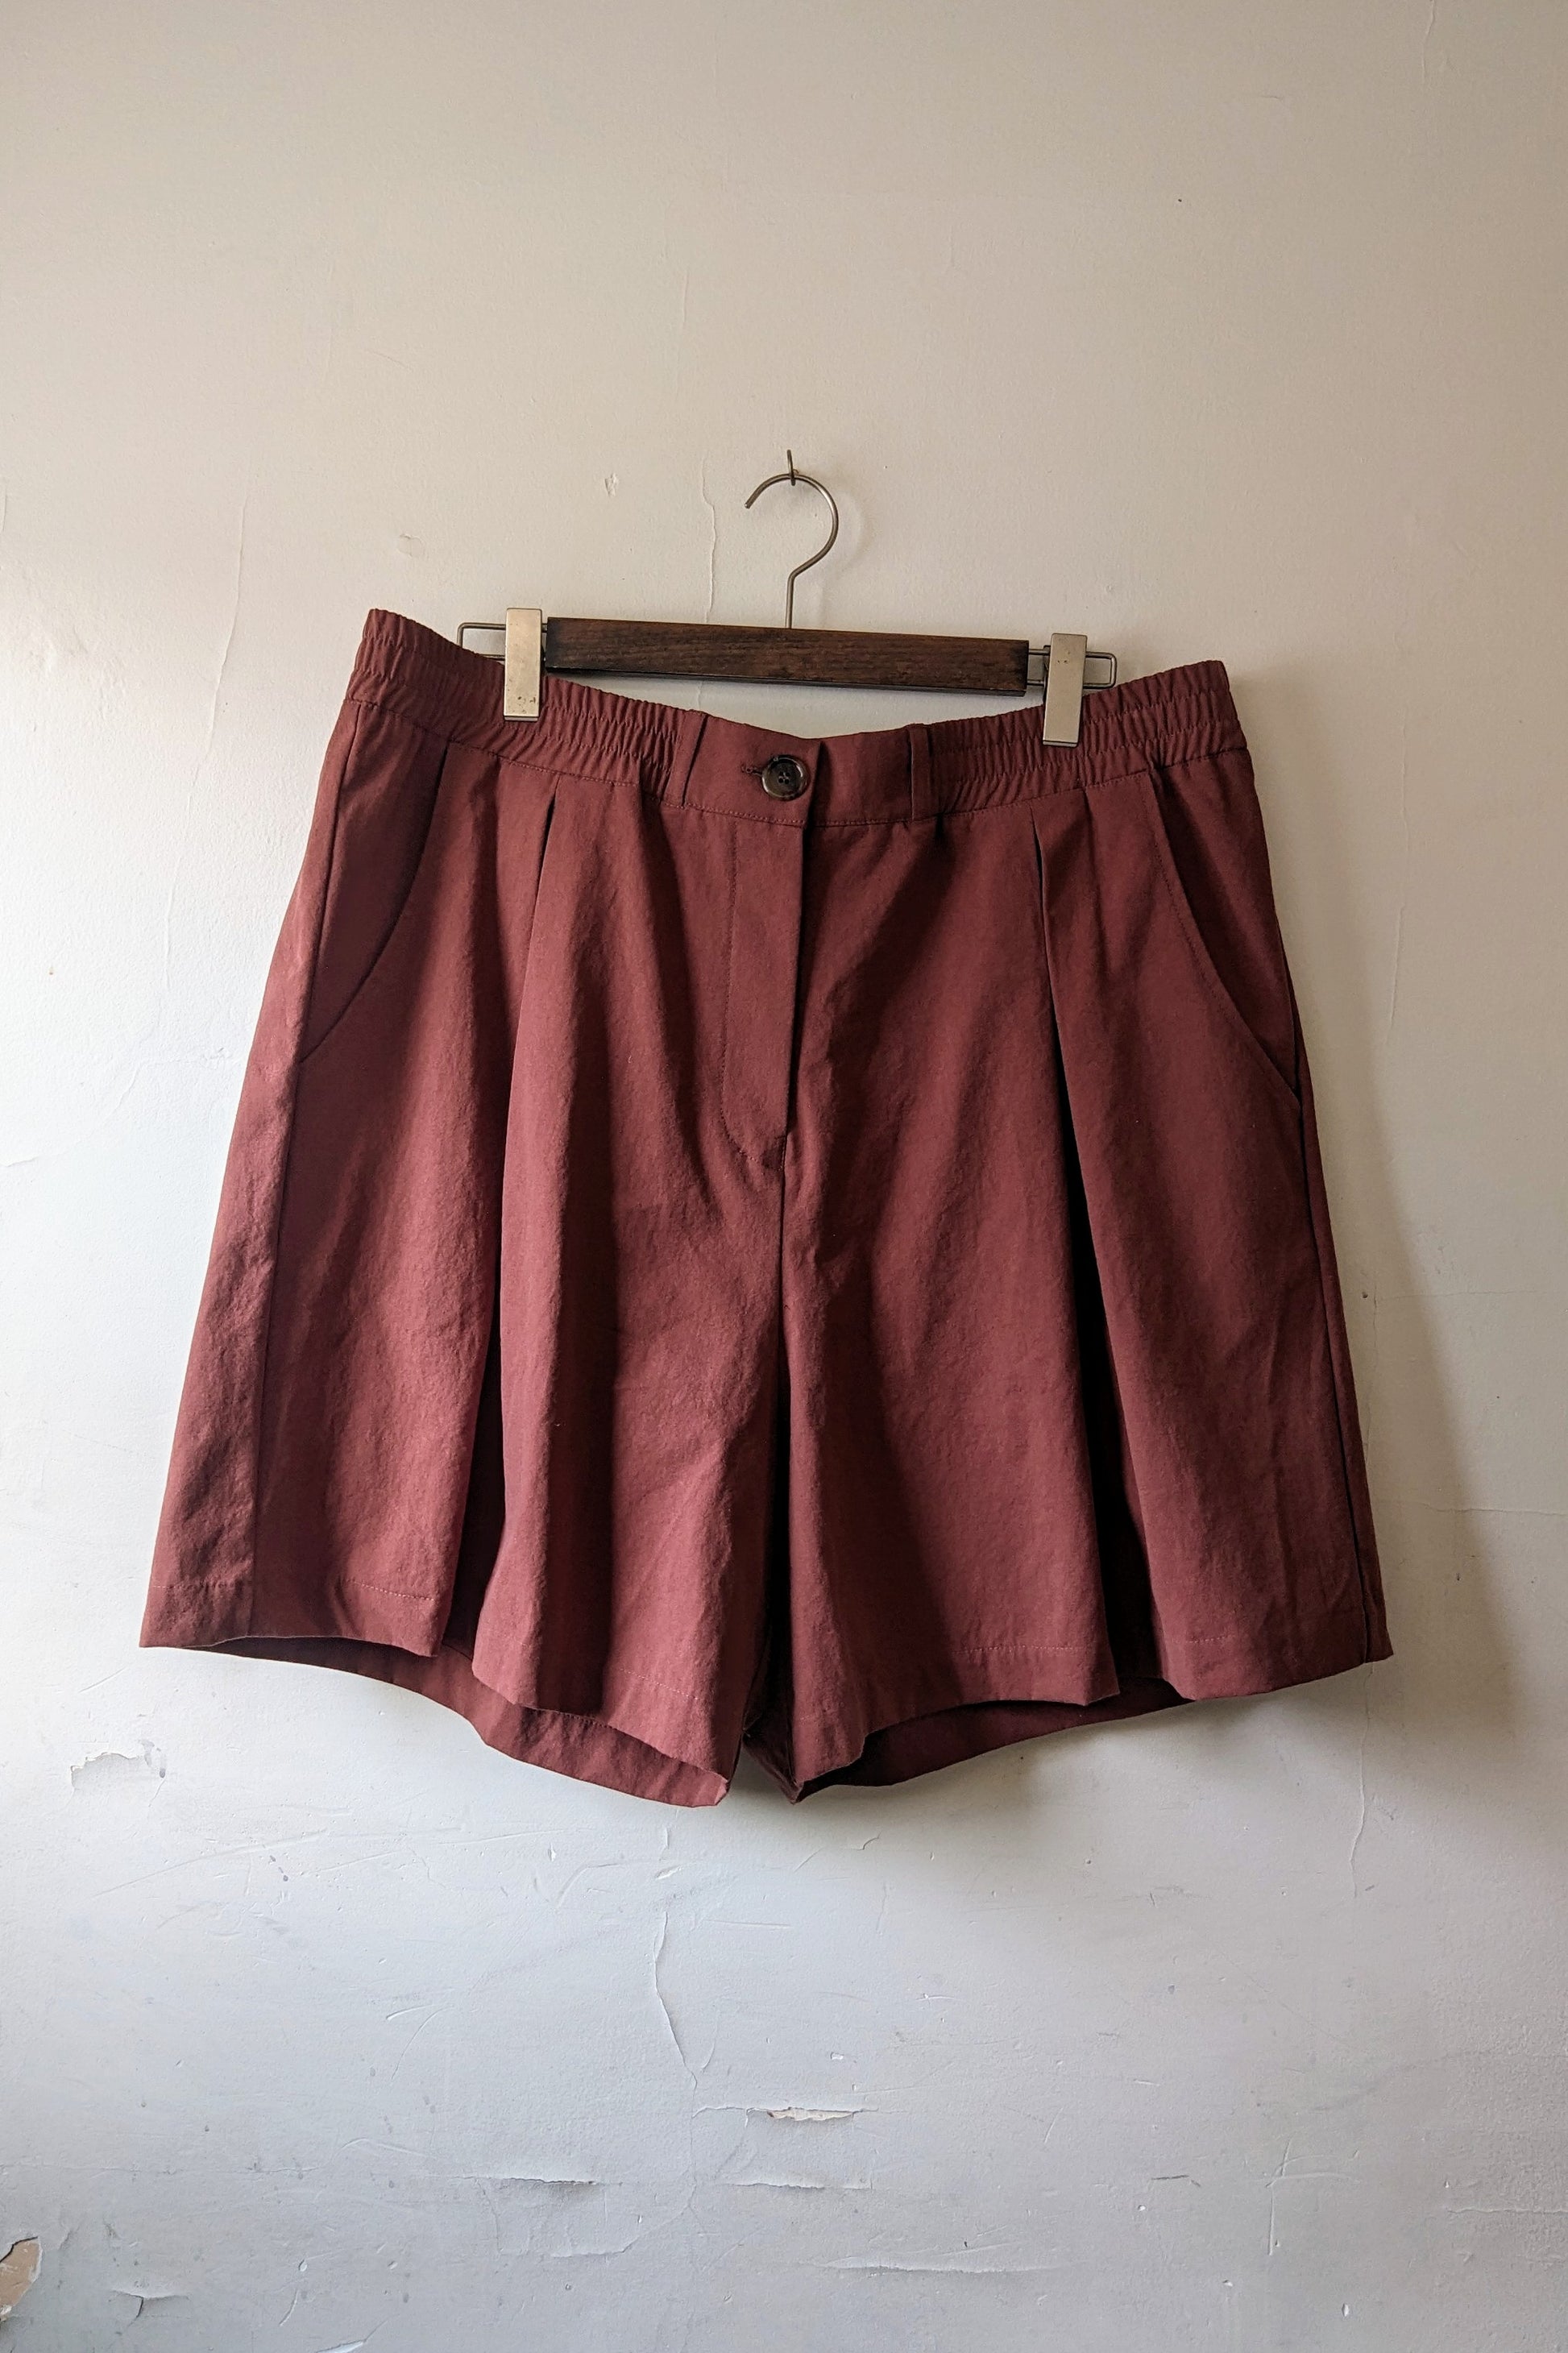  Lois Shorts in Organic Brushed Cotton by Connally Goods